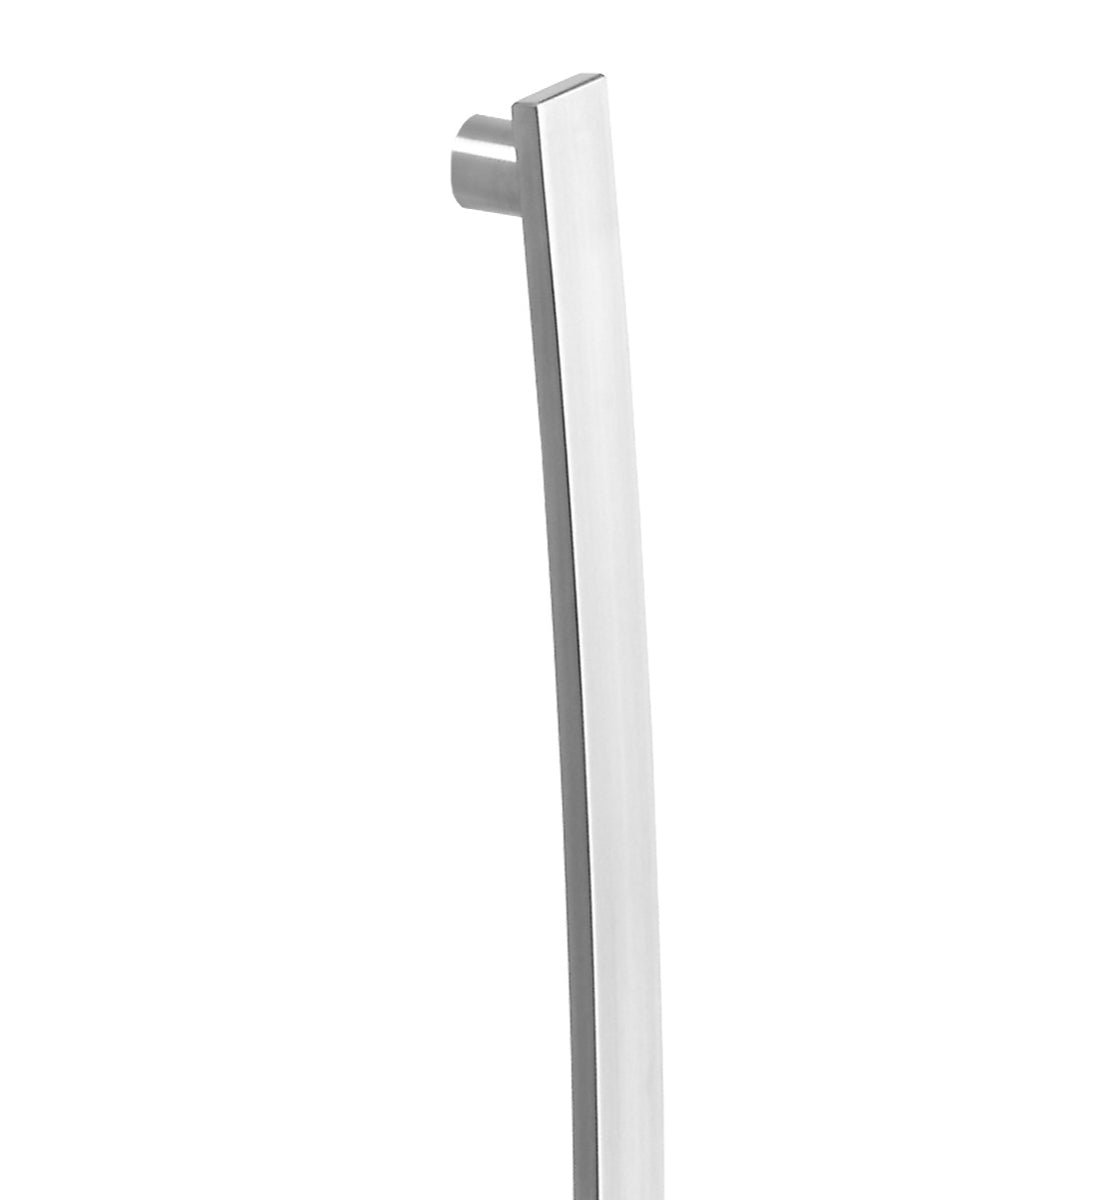 8100 Single Entrance Handle, Rear Disk Fix, 645mm x 40mm x 10mm, CTC 600mm in Satin Stainless